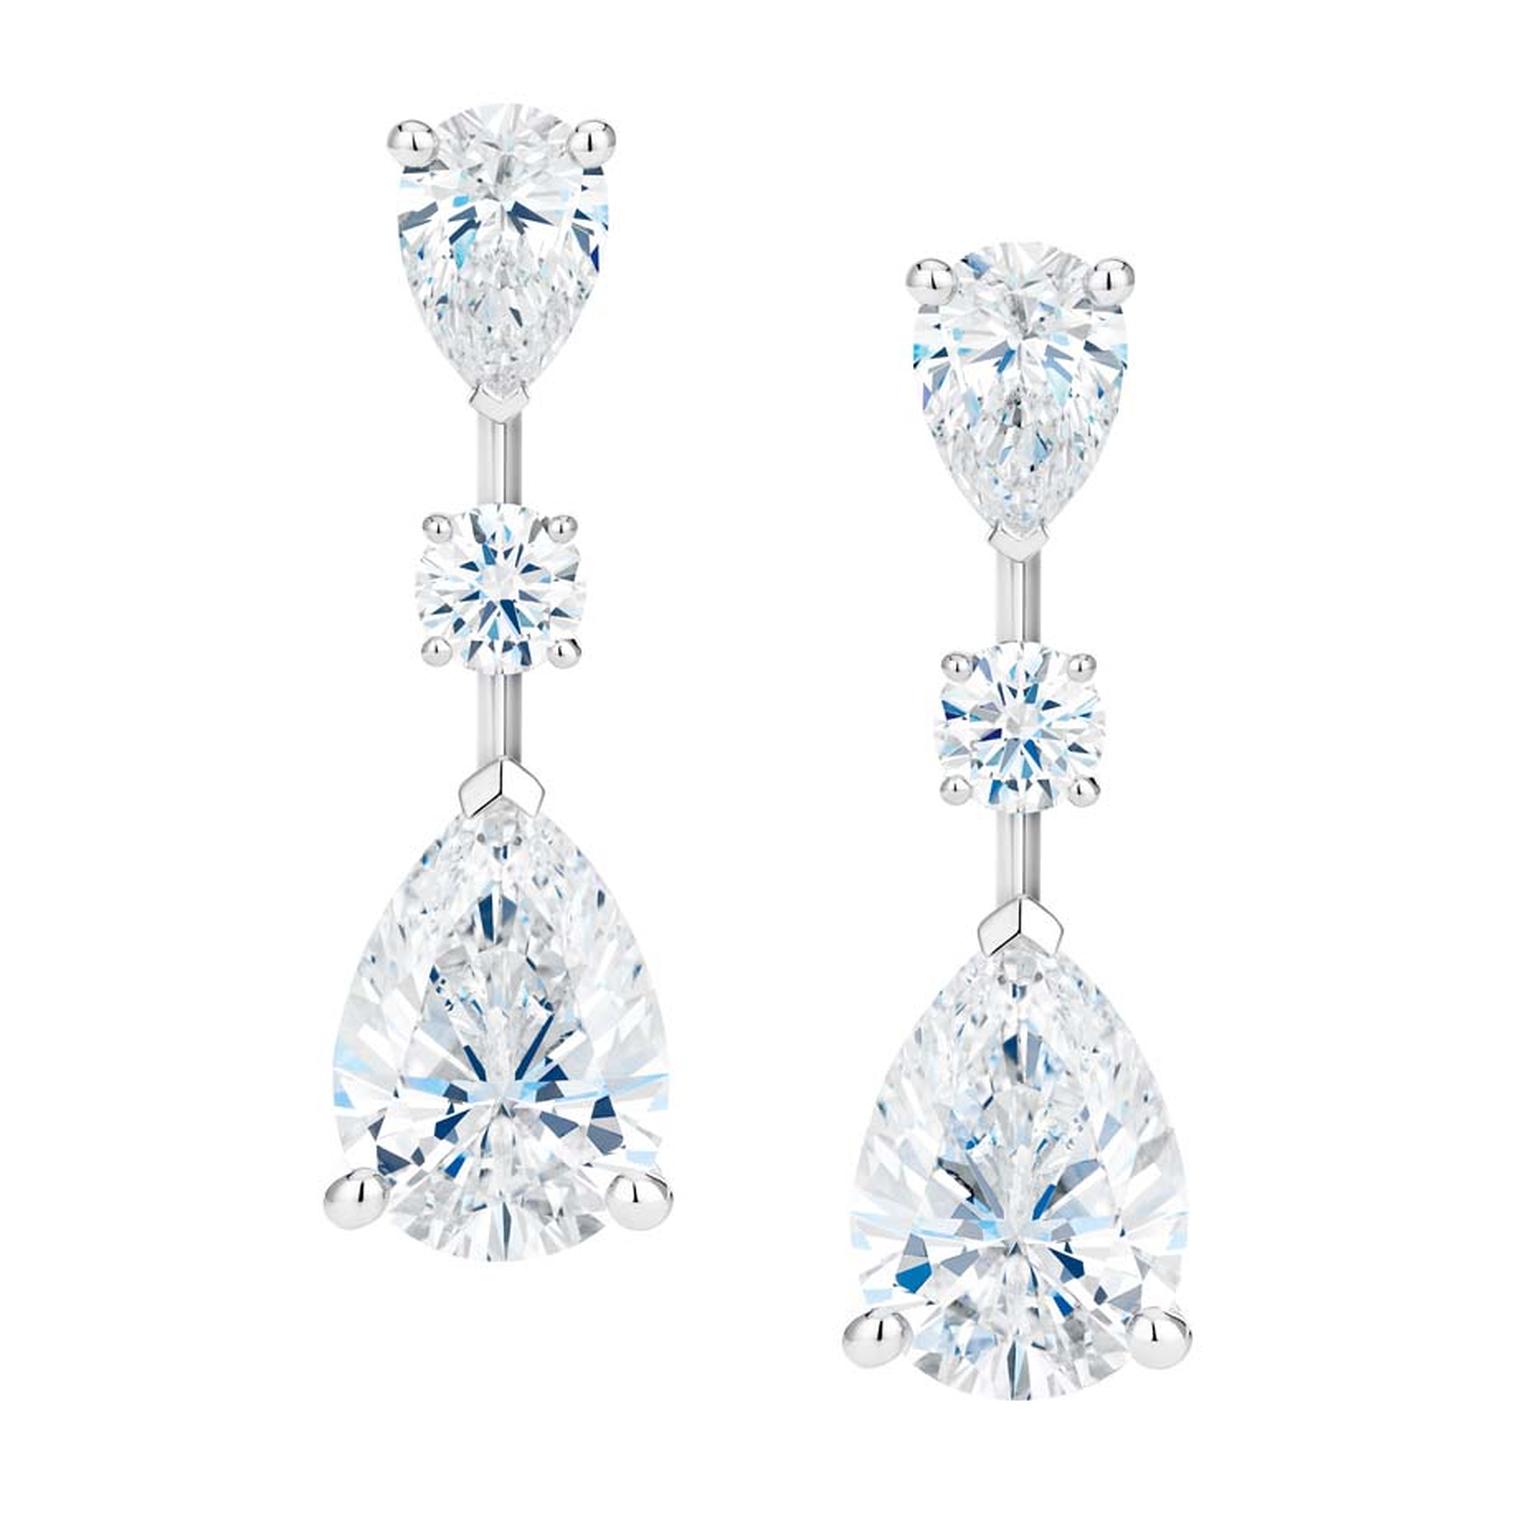 De Beers classic diamond solitaire earrings with detachable diamond drops from the new Drops of Light collection.